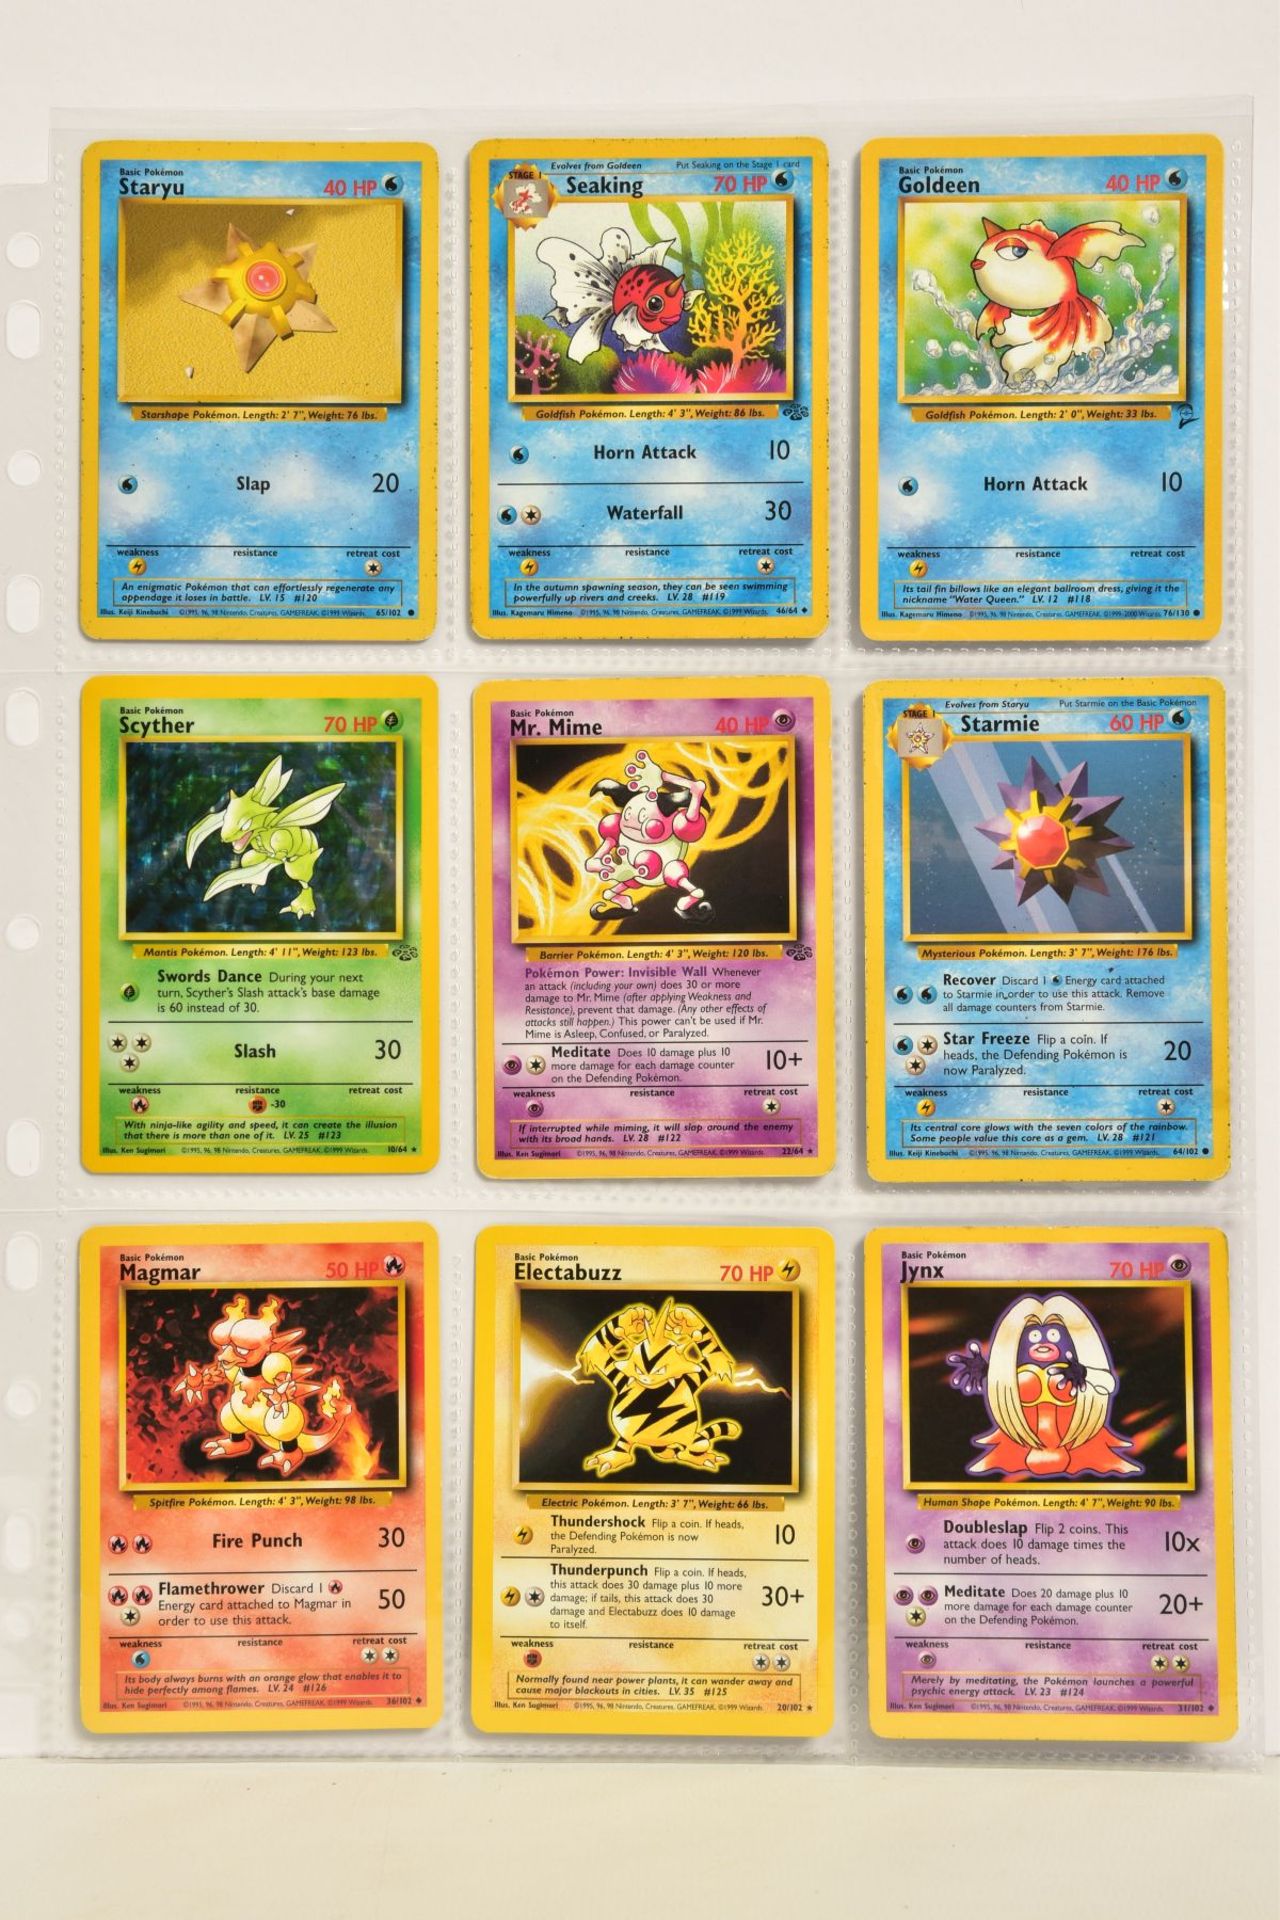 POKEMON THE TRADING CARD GAME 154 CARDS IN POKEMON TCG FOLDER, includes one of each of the - Image 15 of 20